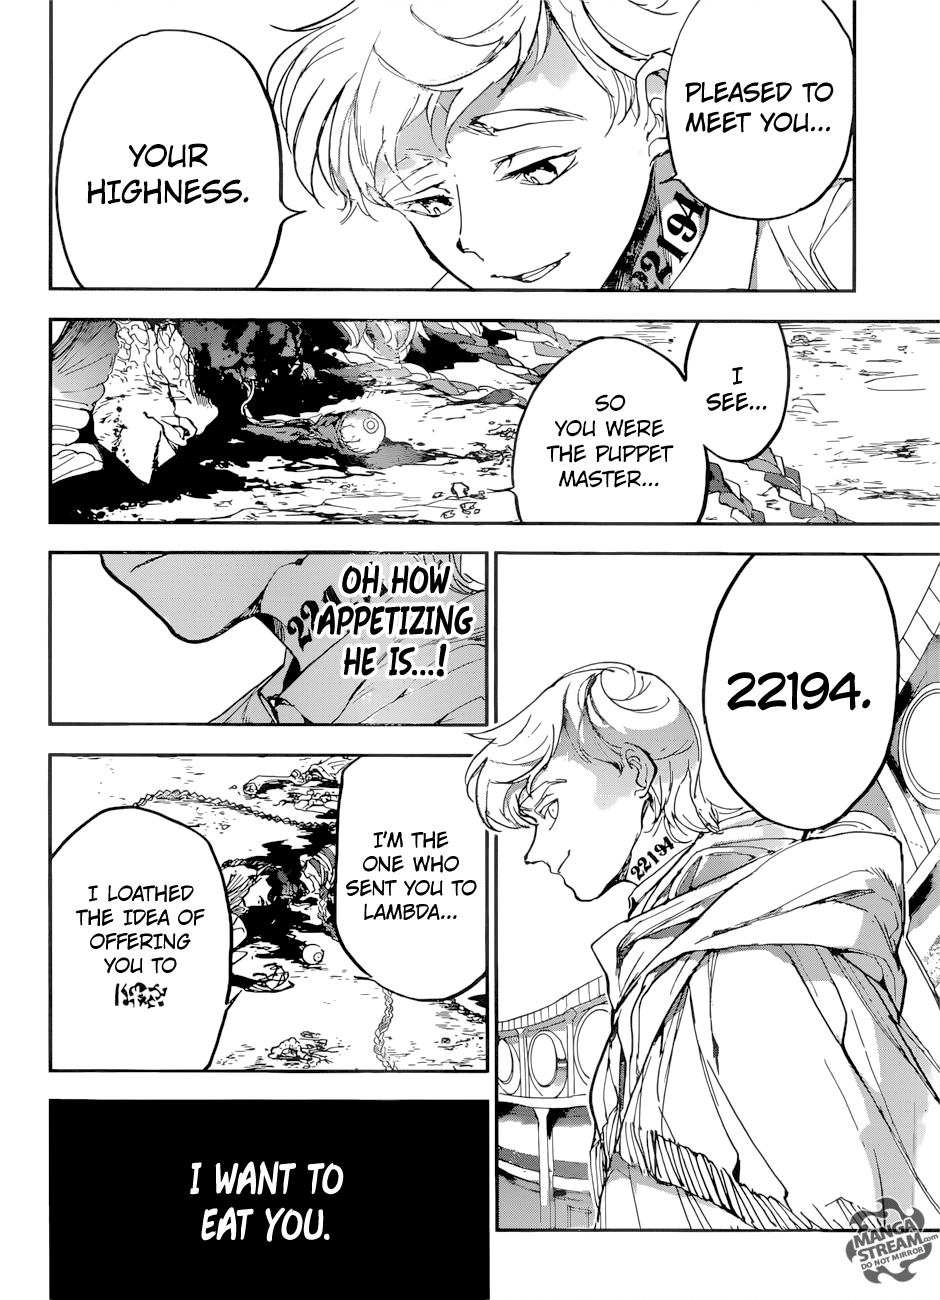 The Promised Neverland 152